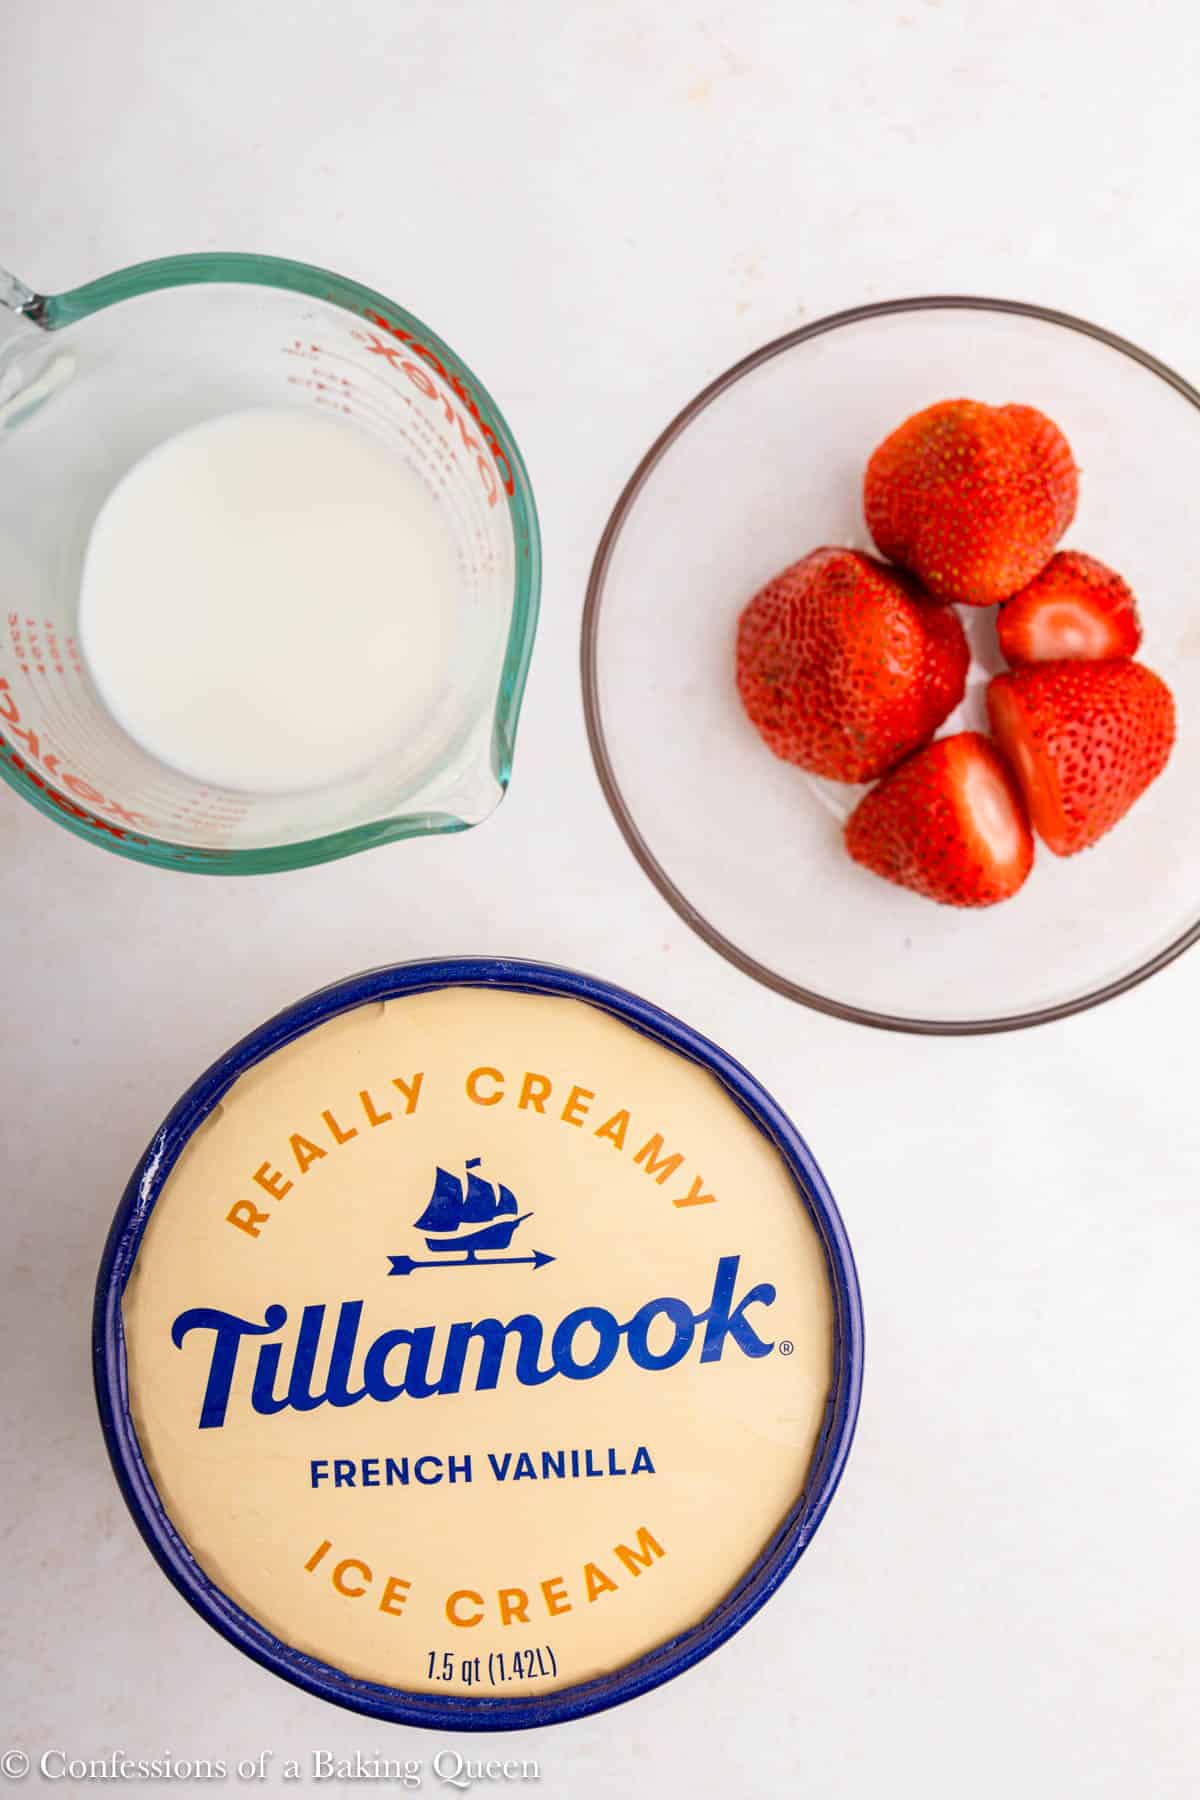 tillamook vanilla ice cream next to a bowl of strawberries and some milk on a light surface